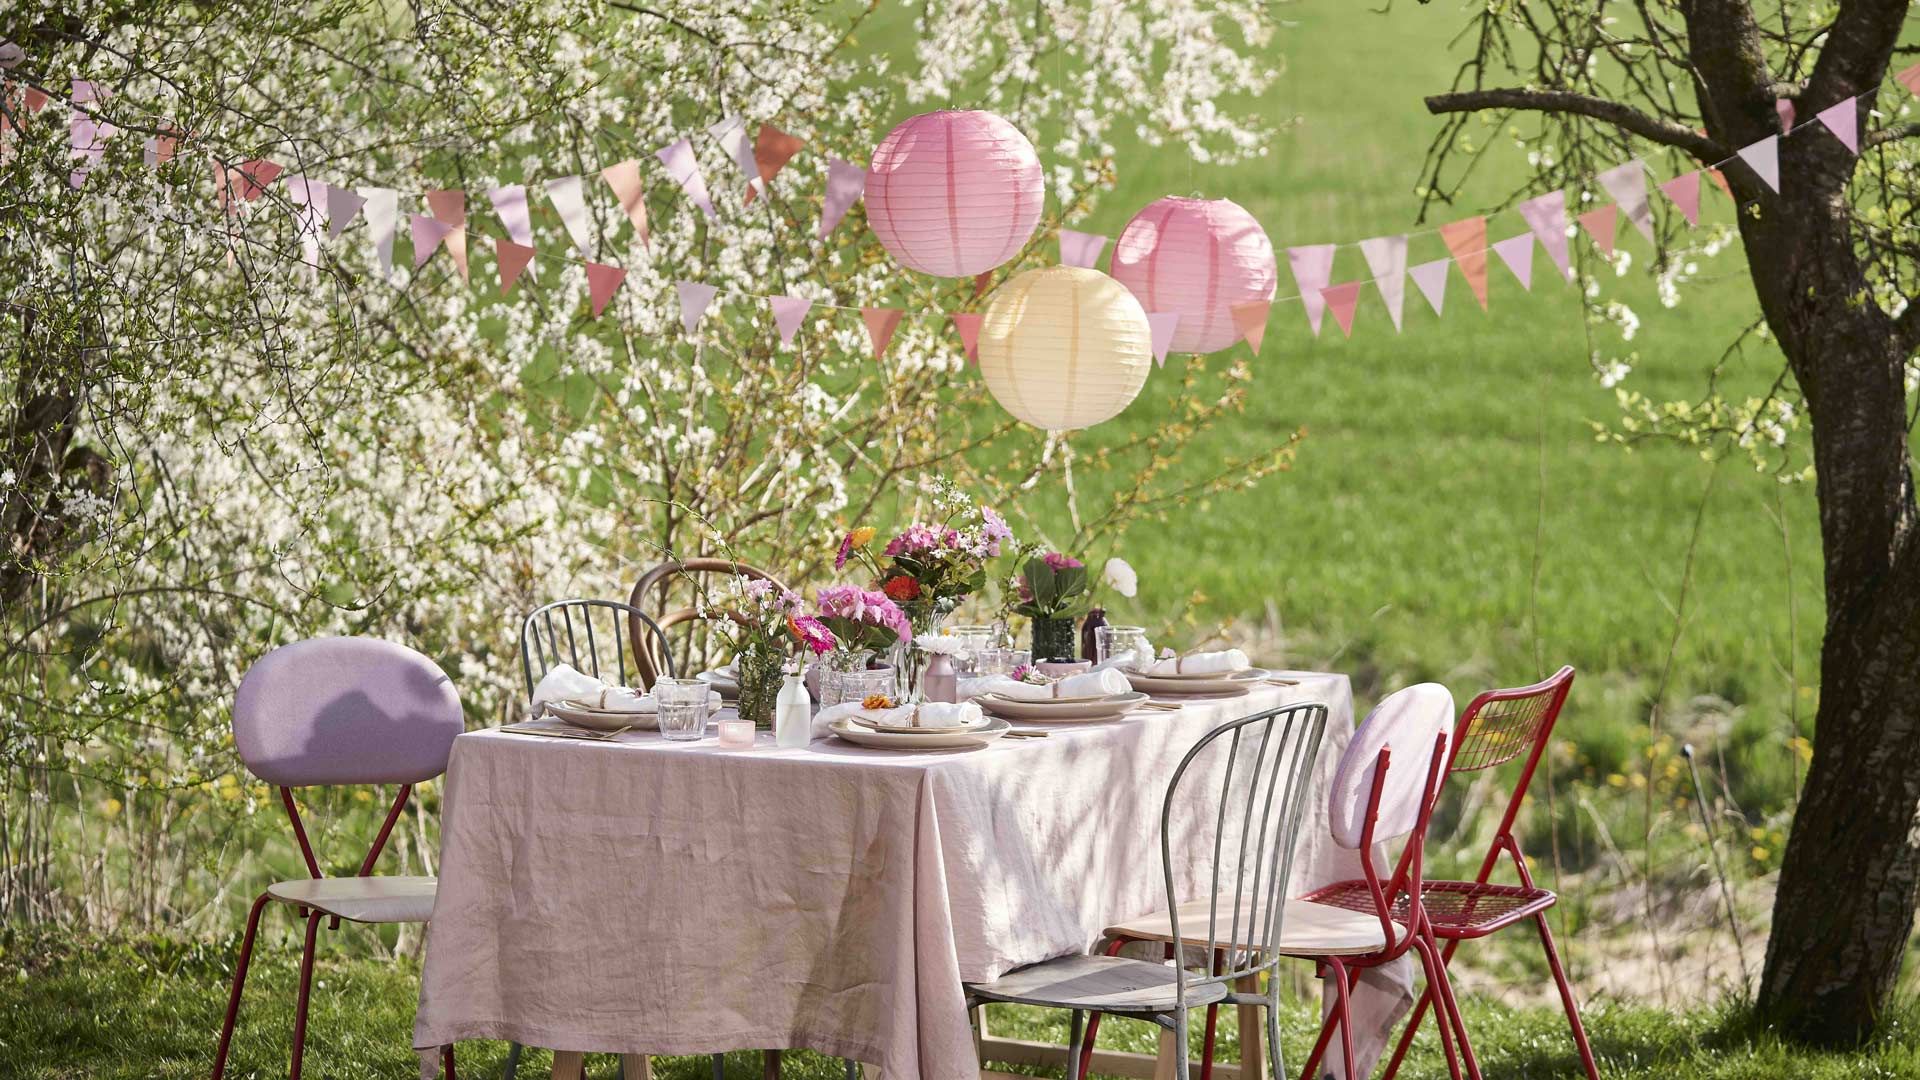 Garden party ideas: Transform your outdoor space with these inspiring ...